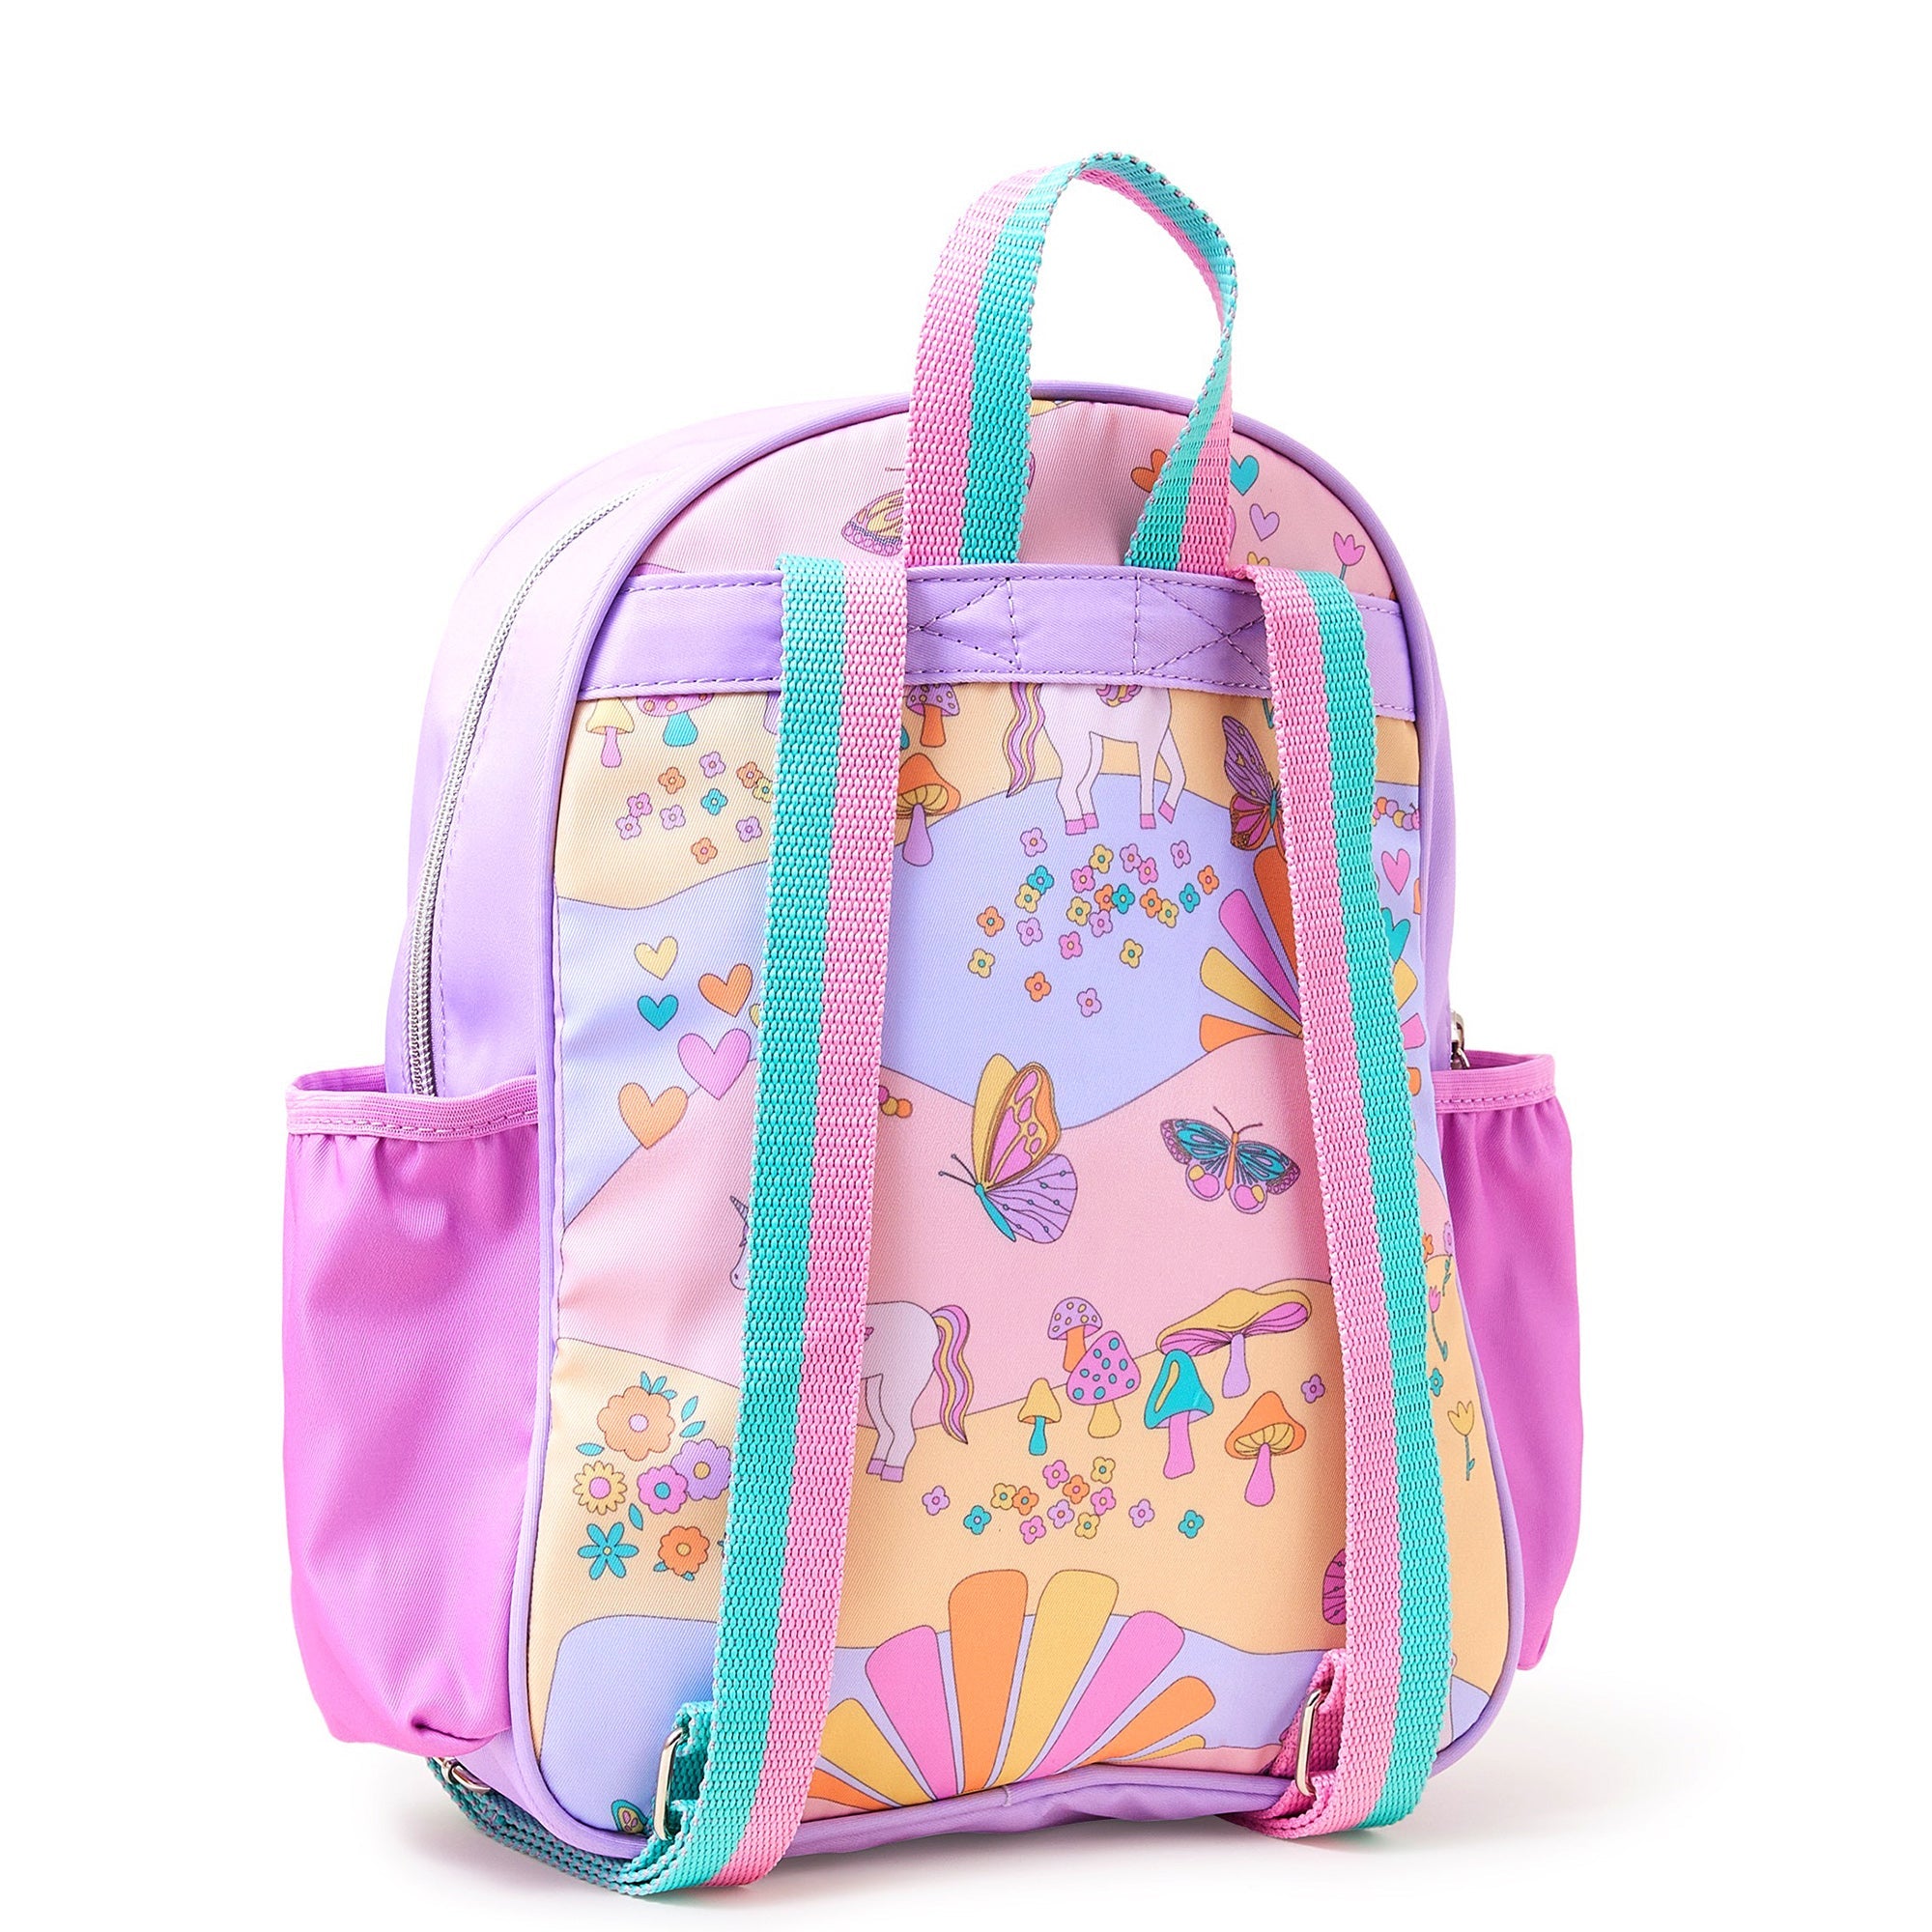 Kids Unicorn Print Backpack Features